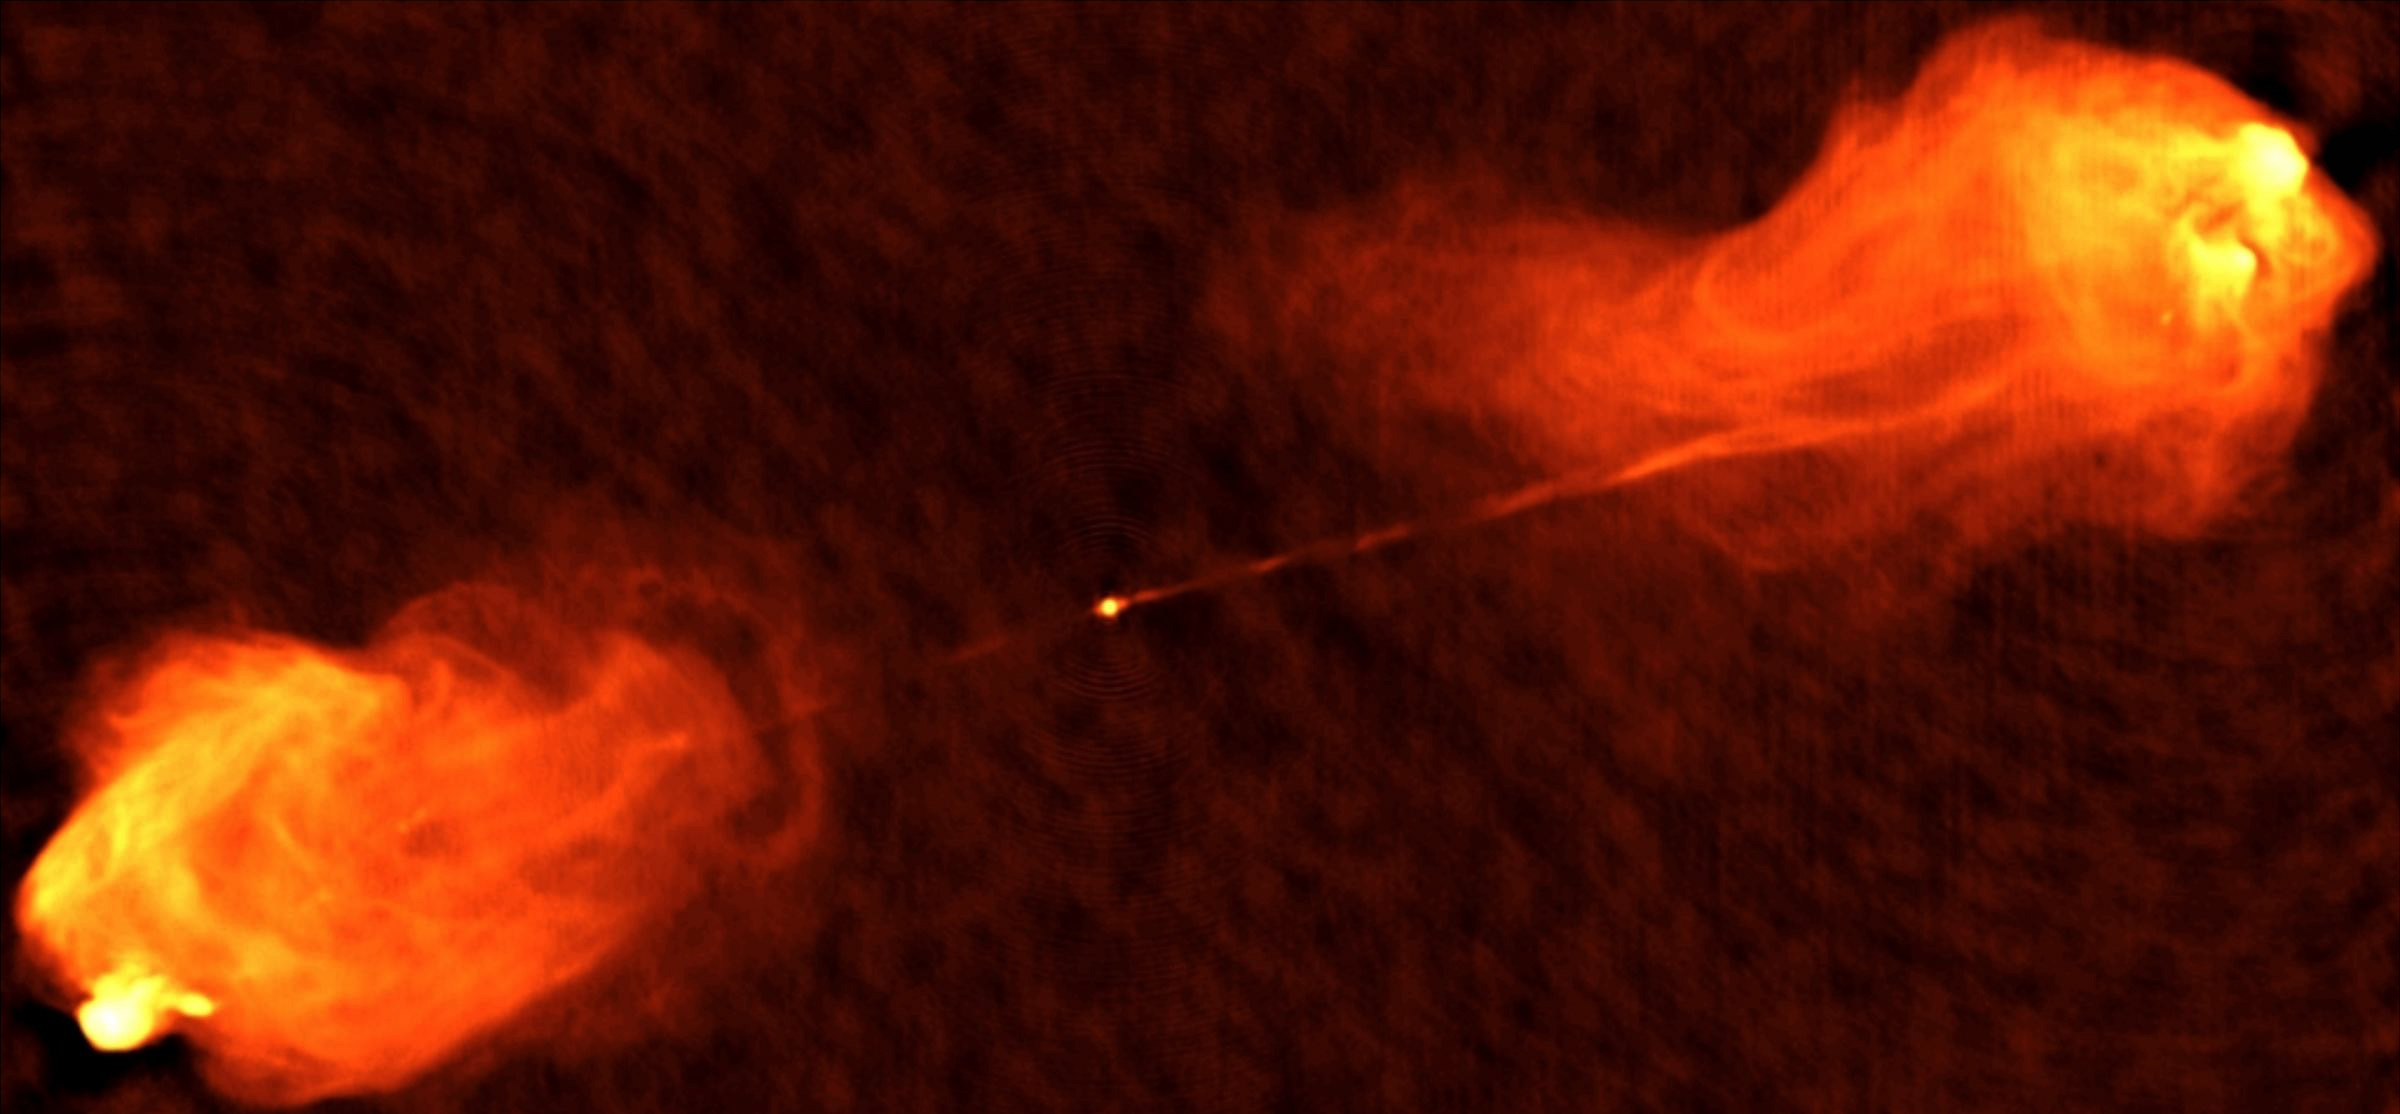 Radio data from the National Science Foundation’s Very Large Array facility was used to construct this image of Cygnus A, the brightest radio source in the sky located outside our galaxy.